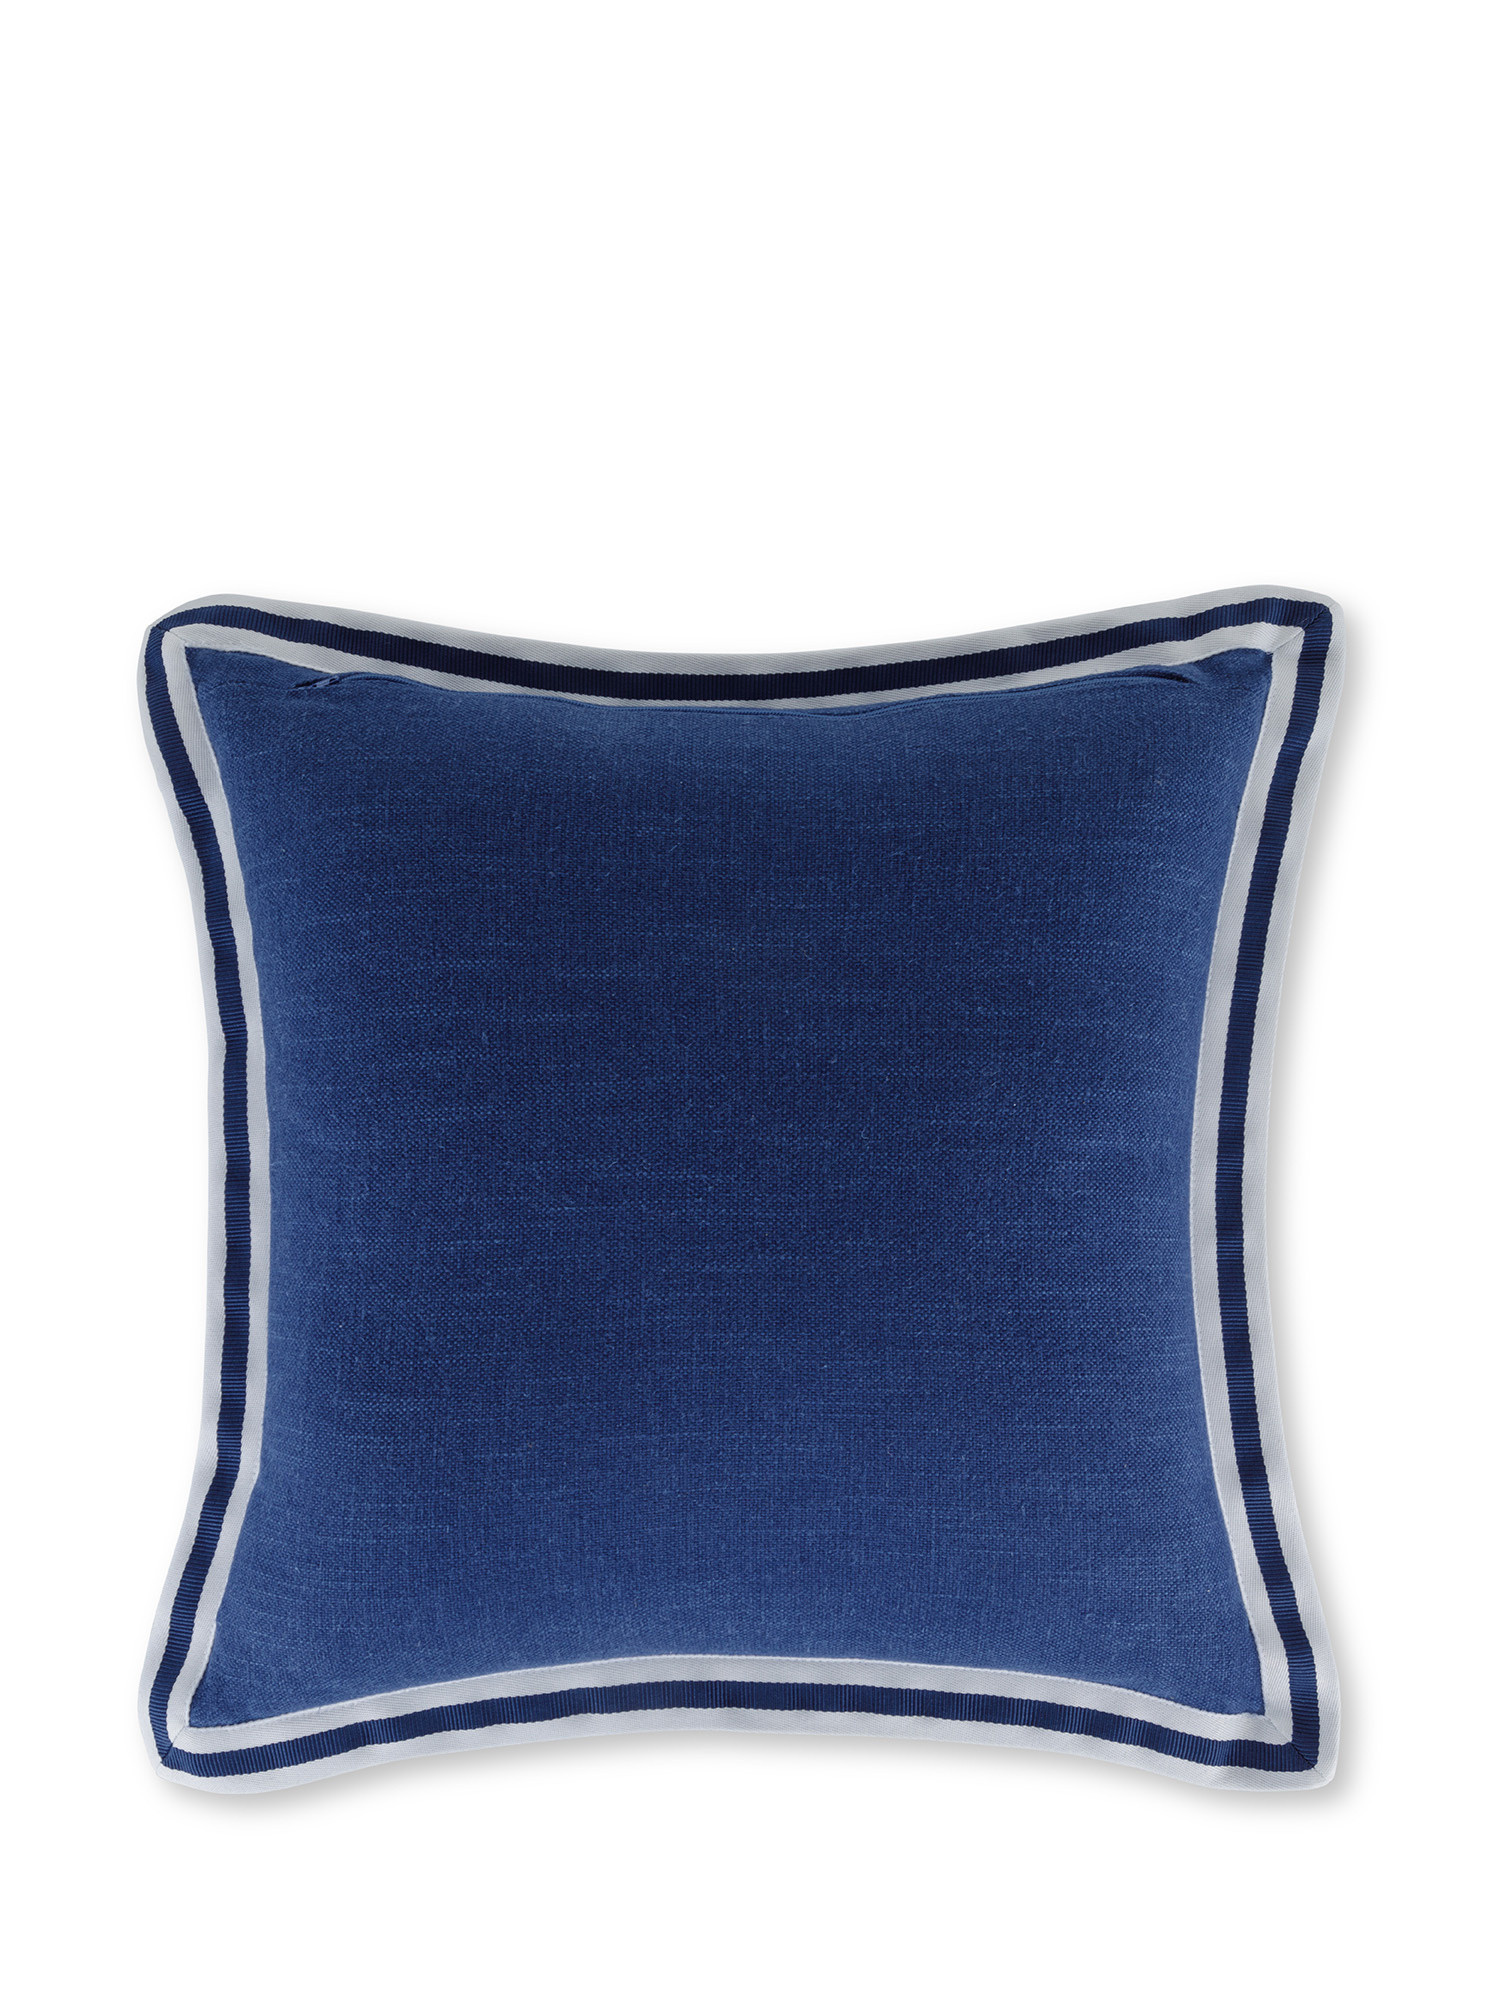 Cushion with striped border 45x45 cm, Blue, large image number 1